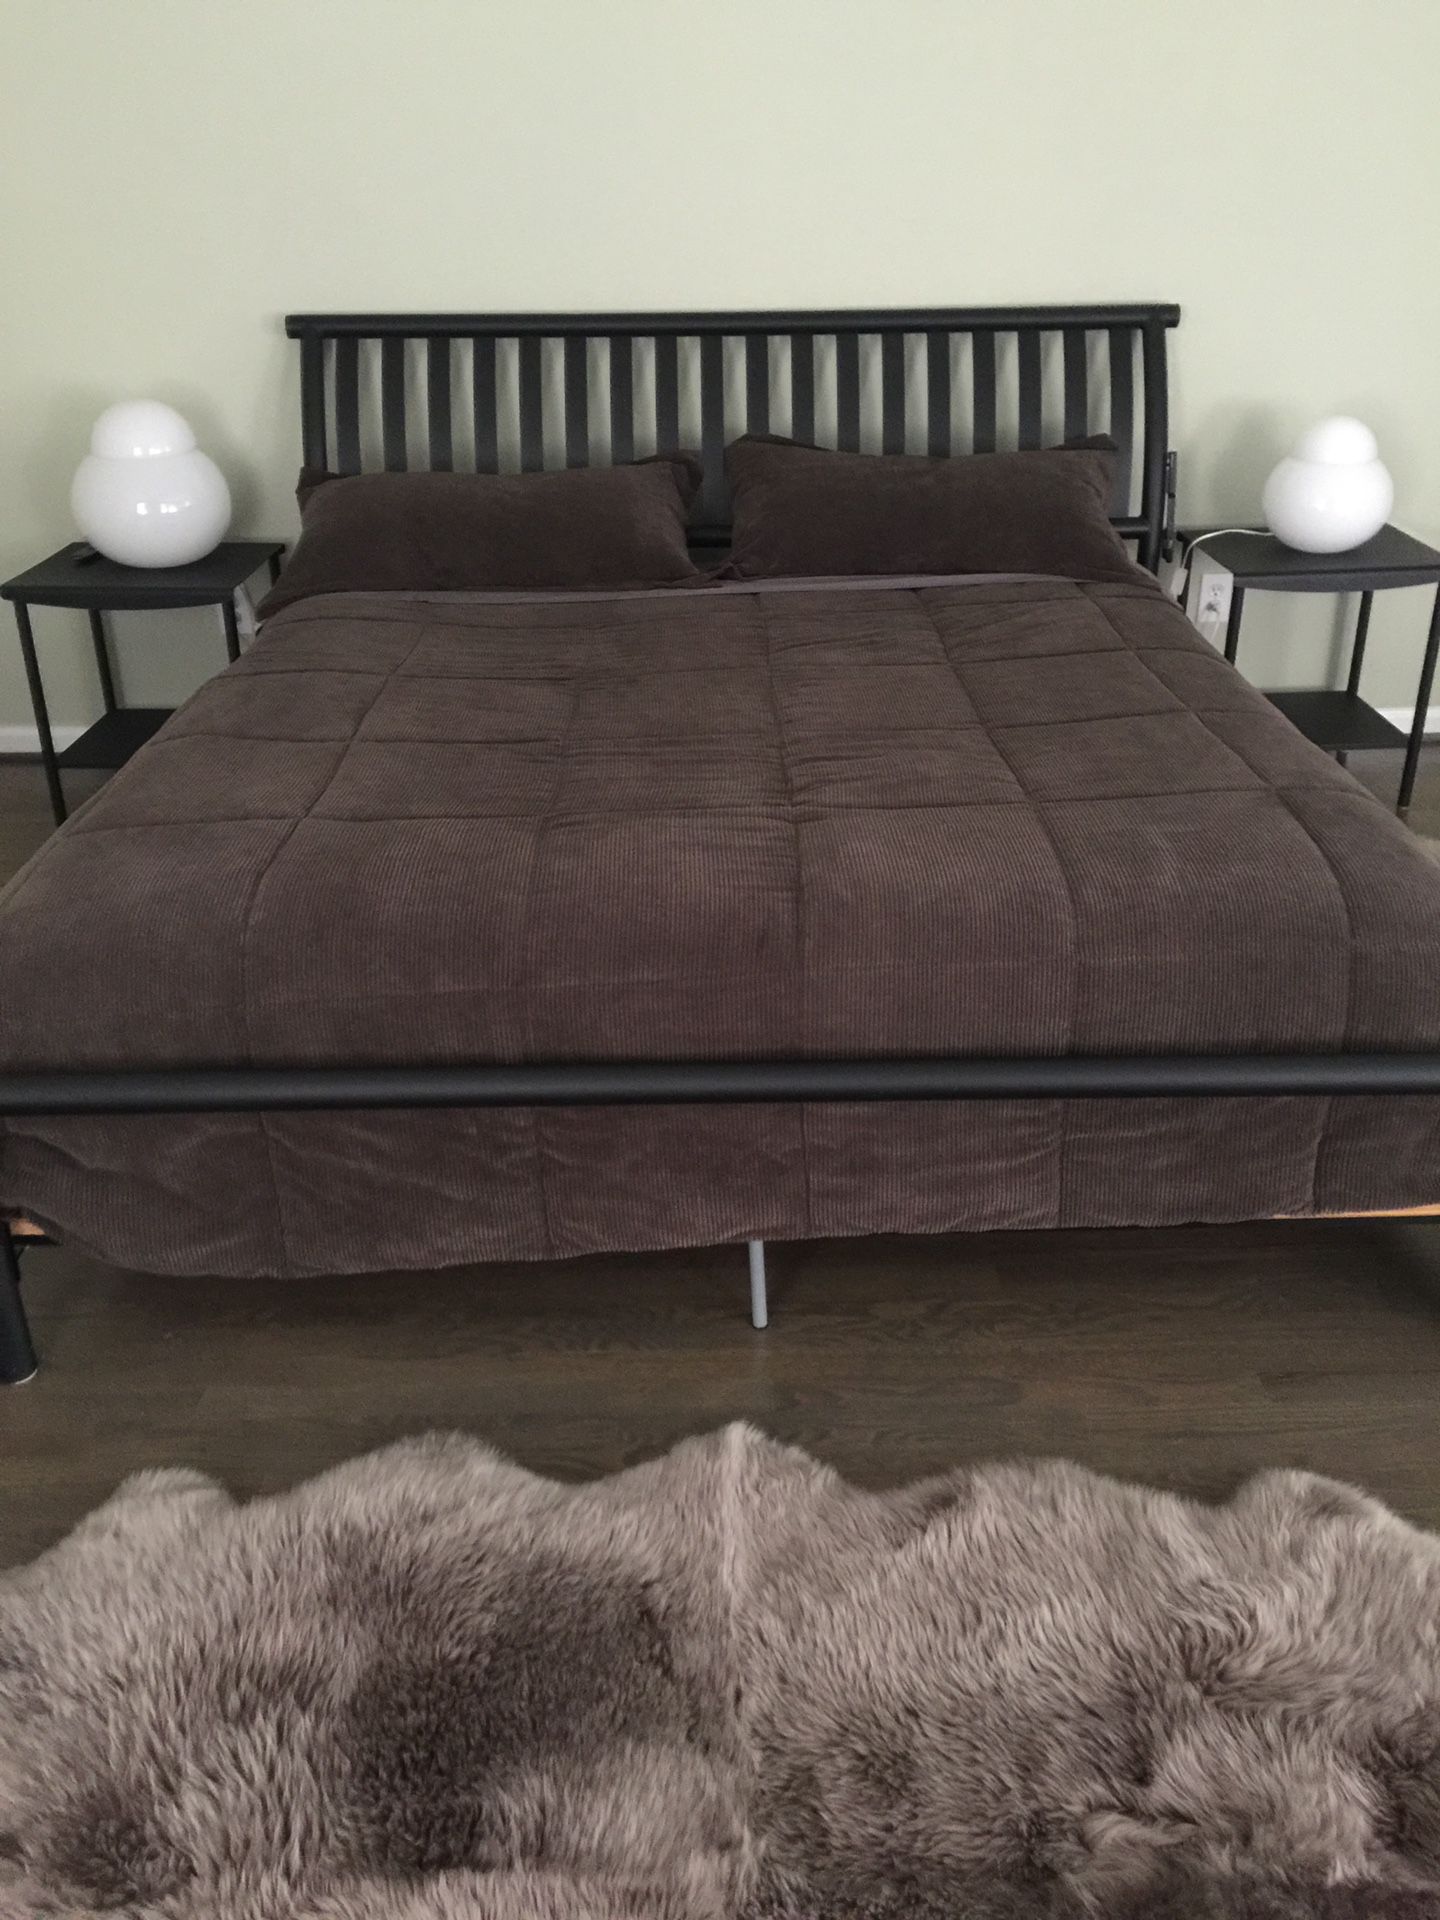 Bedroom Set: King Size Metal Bed Frame, Two Metal Night Stands And Two 3 Drawers Vertical Dresser Storage Tower Organizer 